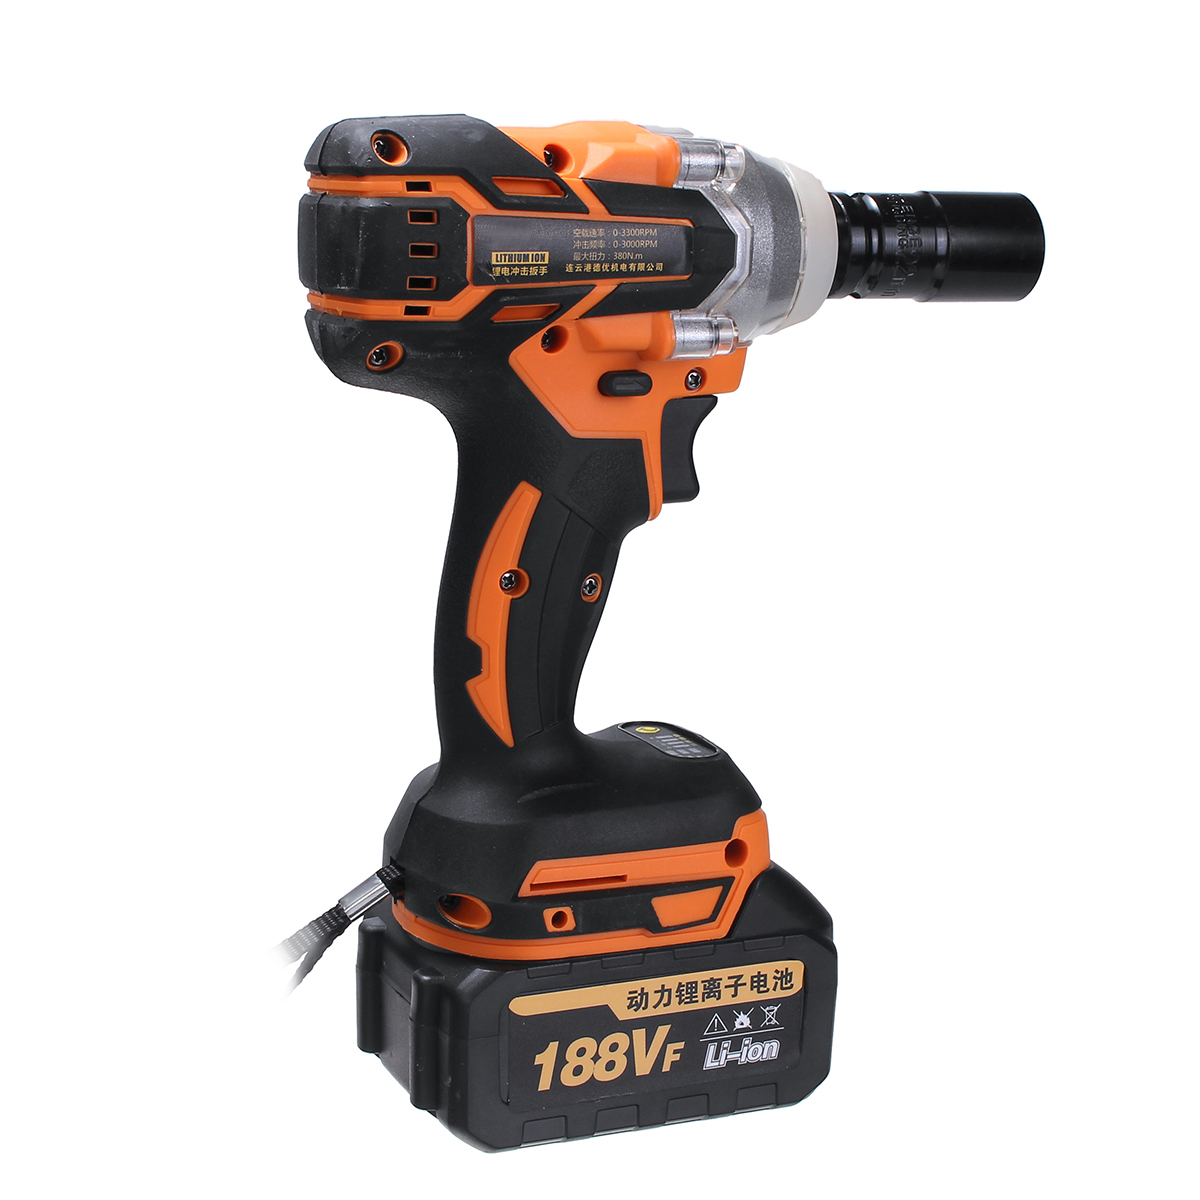 188VF-380Nm-12quot-Brushless-Cordless-Electric-Impact-Wrench-15000mAH-2x-Battery-1573435-5